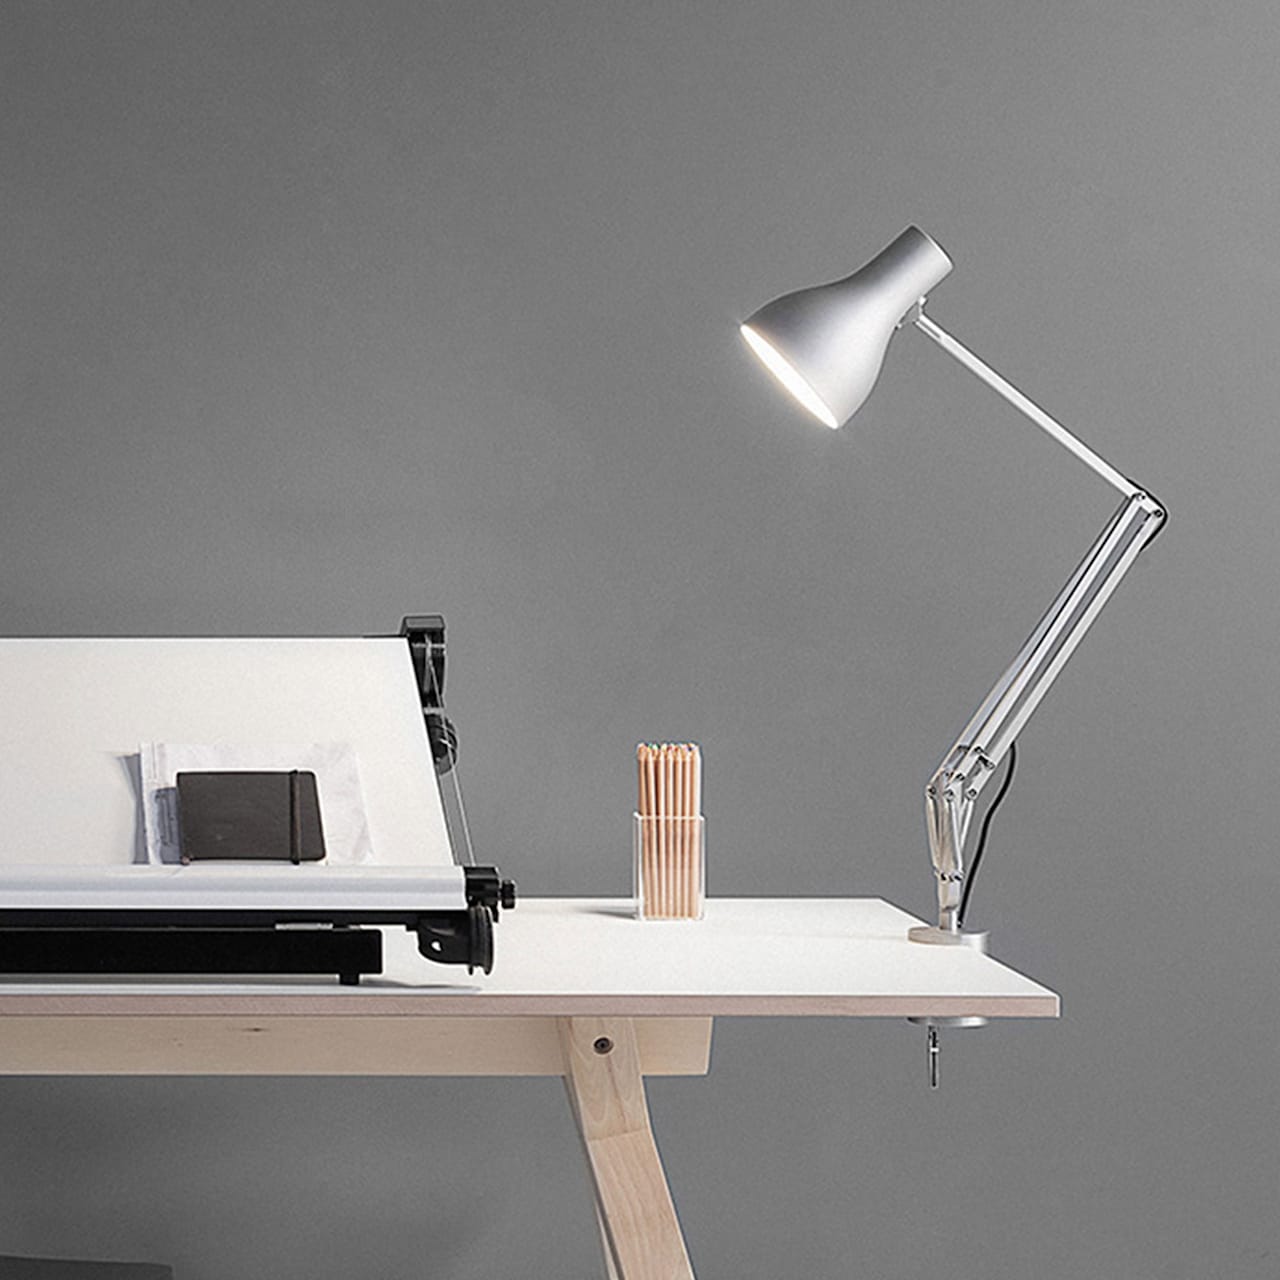 Type 75 Desk Lamp With Clamp